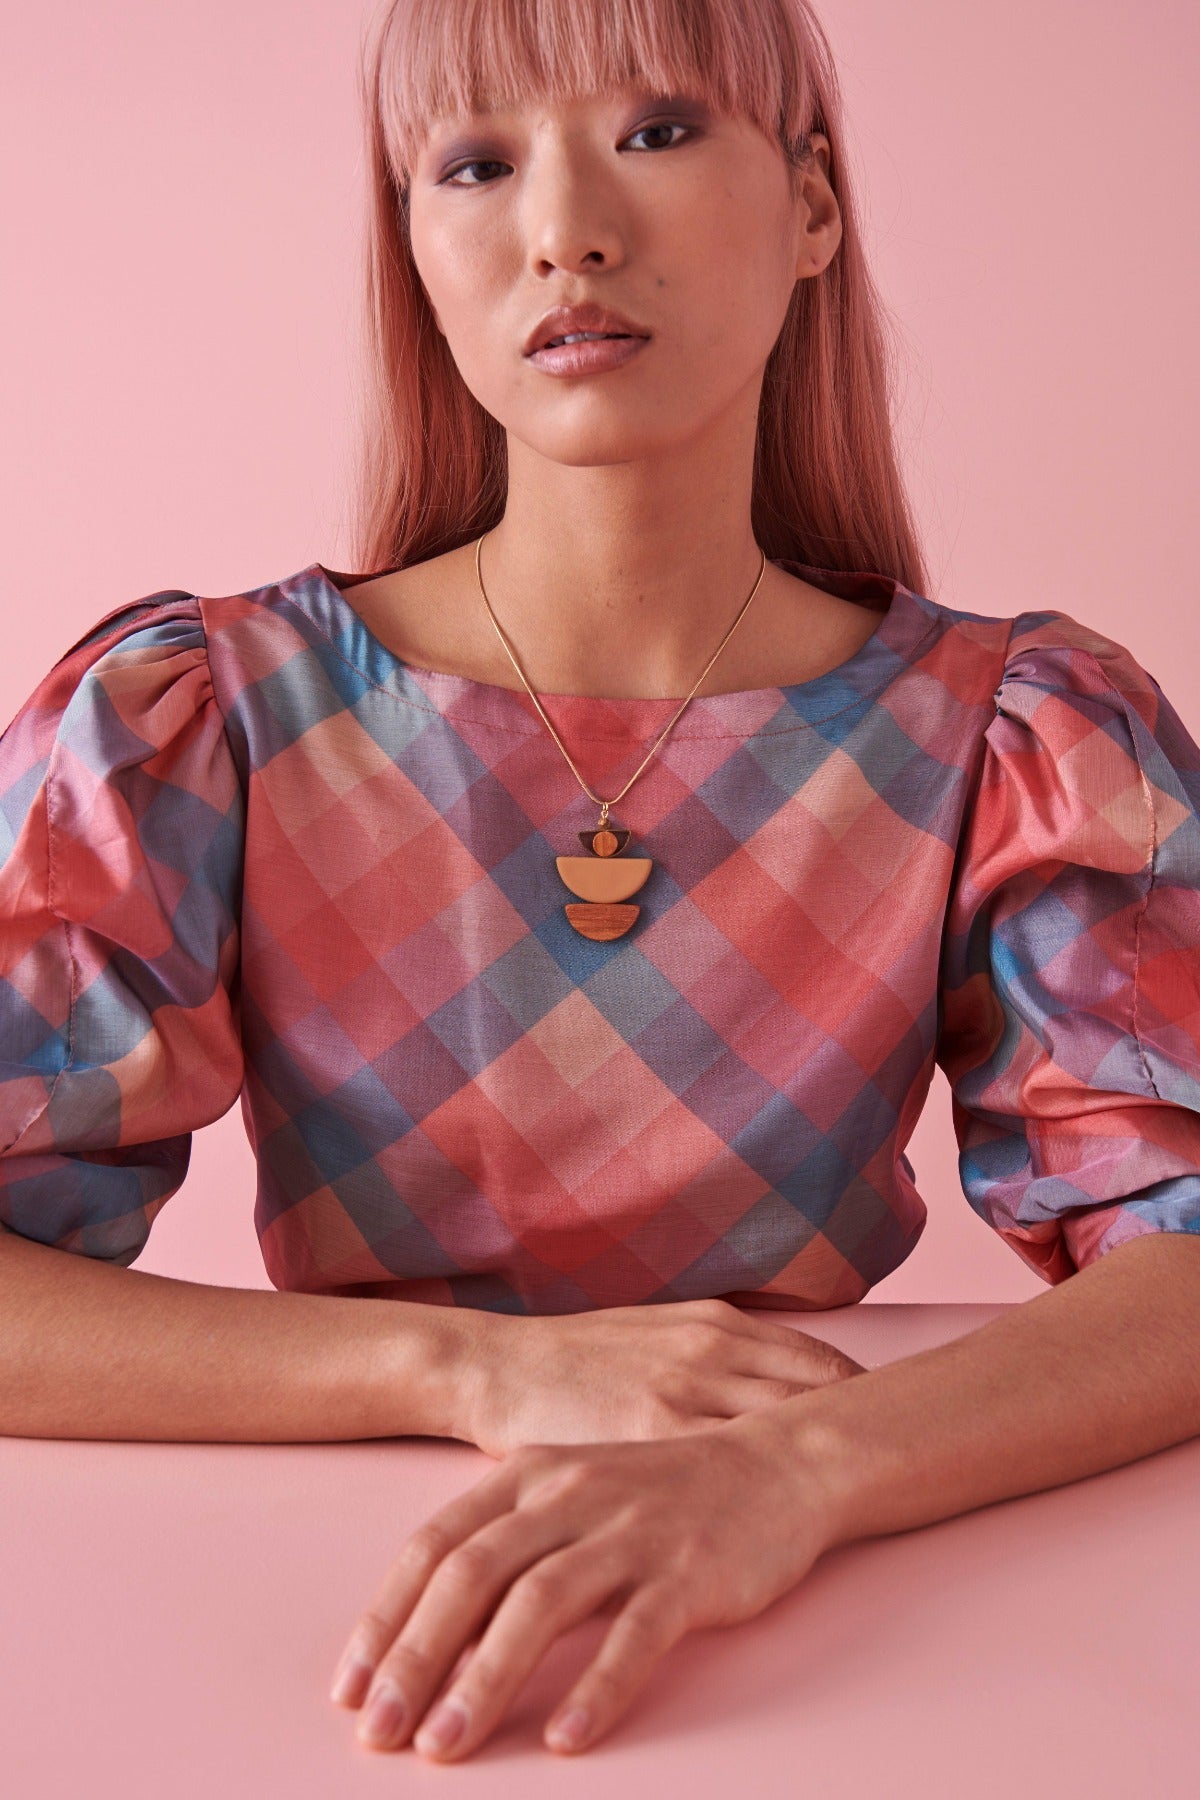 A lady with pink hair sits against a pink background. She models the Marcel necklace in mustard and wears a pink and blue checkered top.